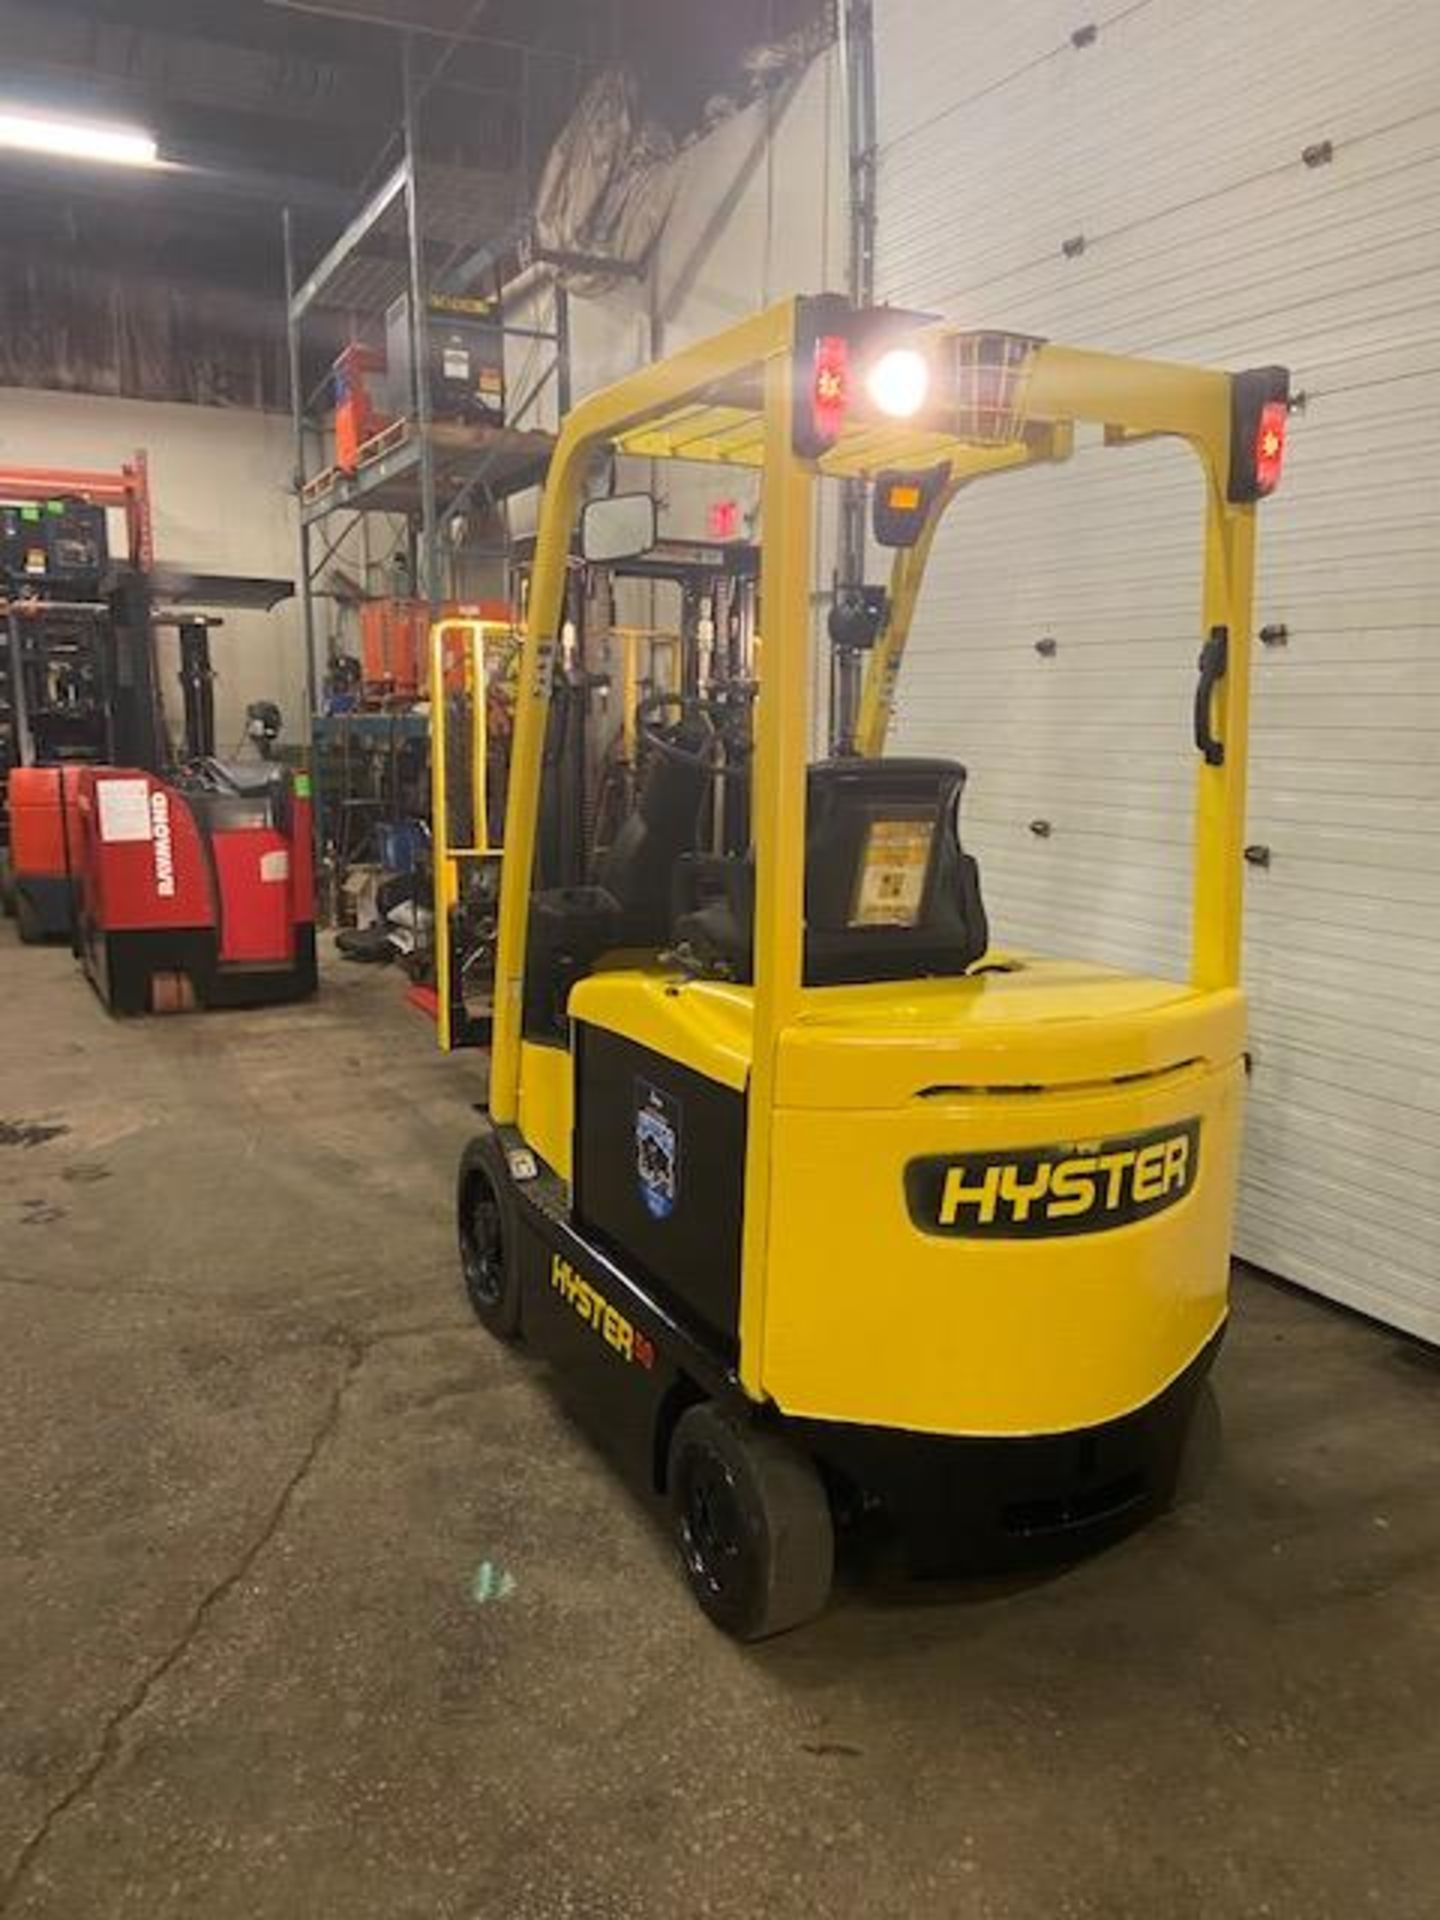 FREE CUSTOMS - 2013 Hyster 5000lbs Capacity Forklift Electric with 3-STAGE MAST sideshift MINT - Image 3 of 3